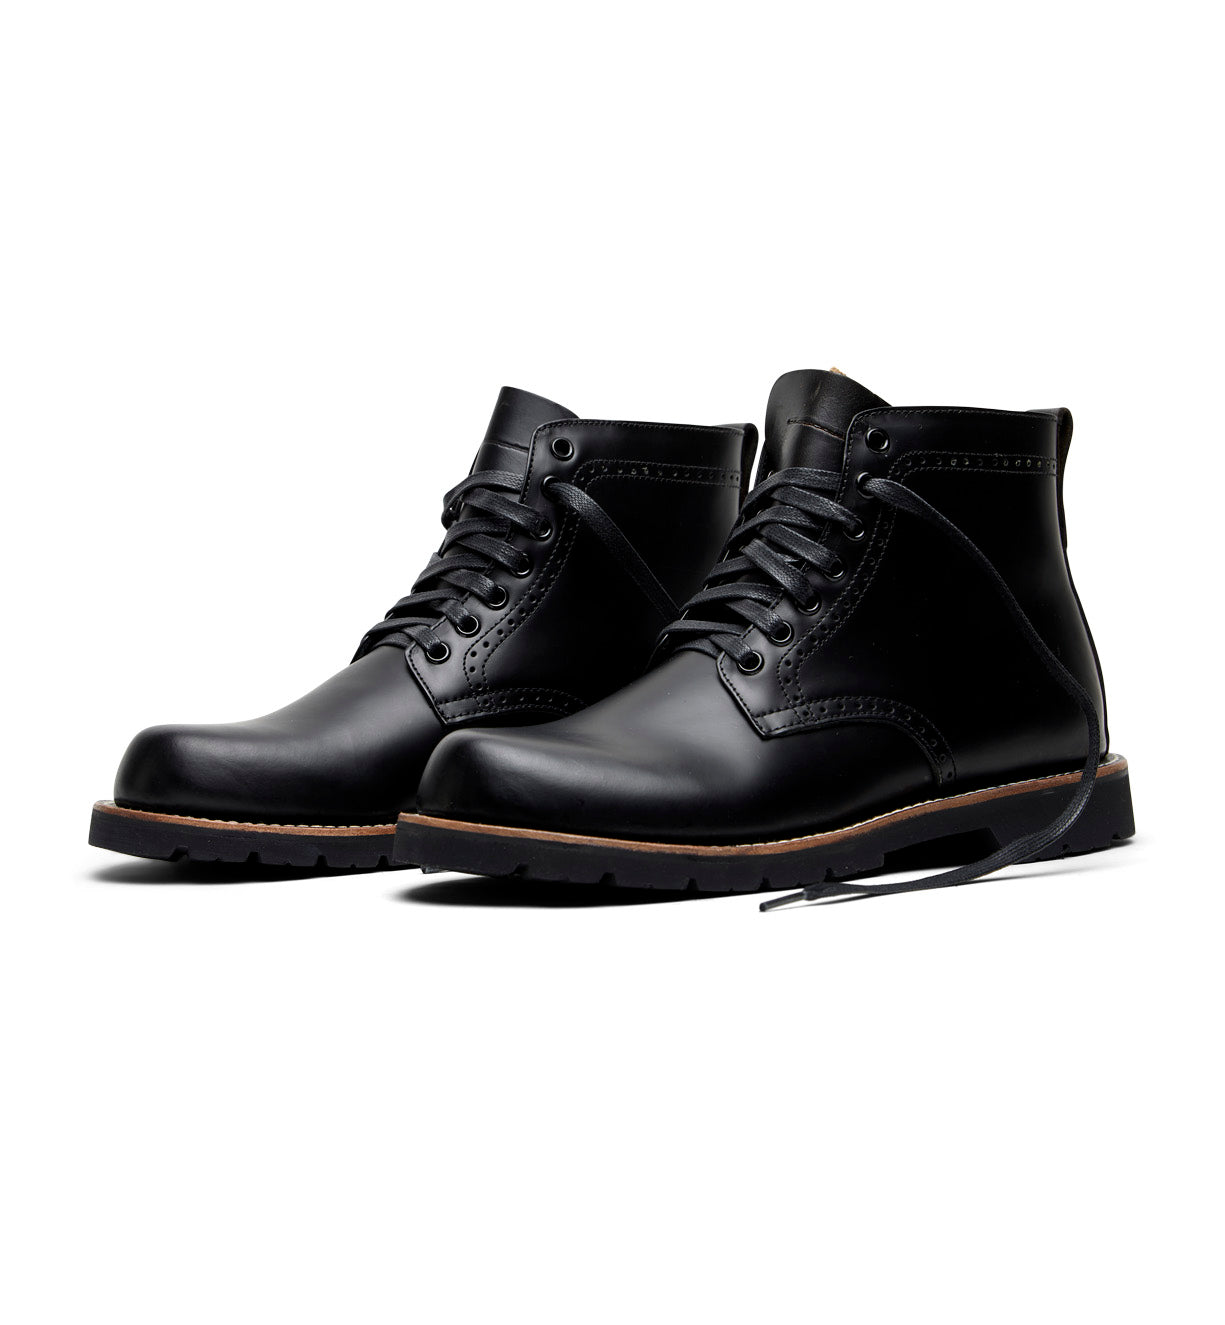 A pair of Tydus black leather boots by Broken Homme with a refined style on a white background.